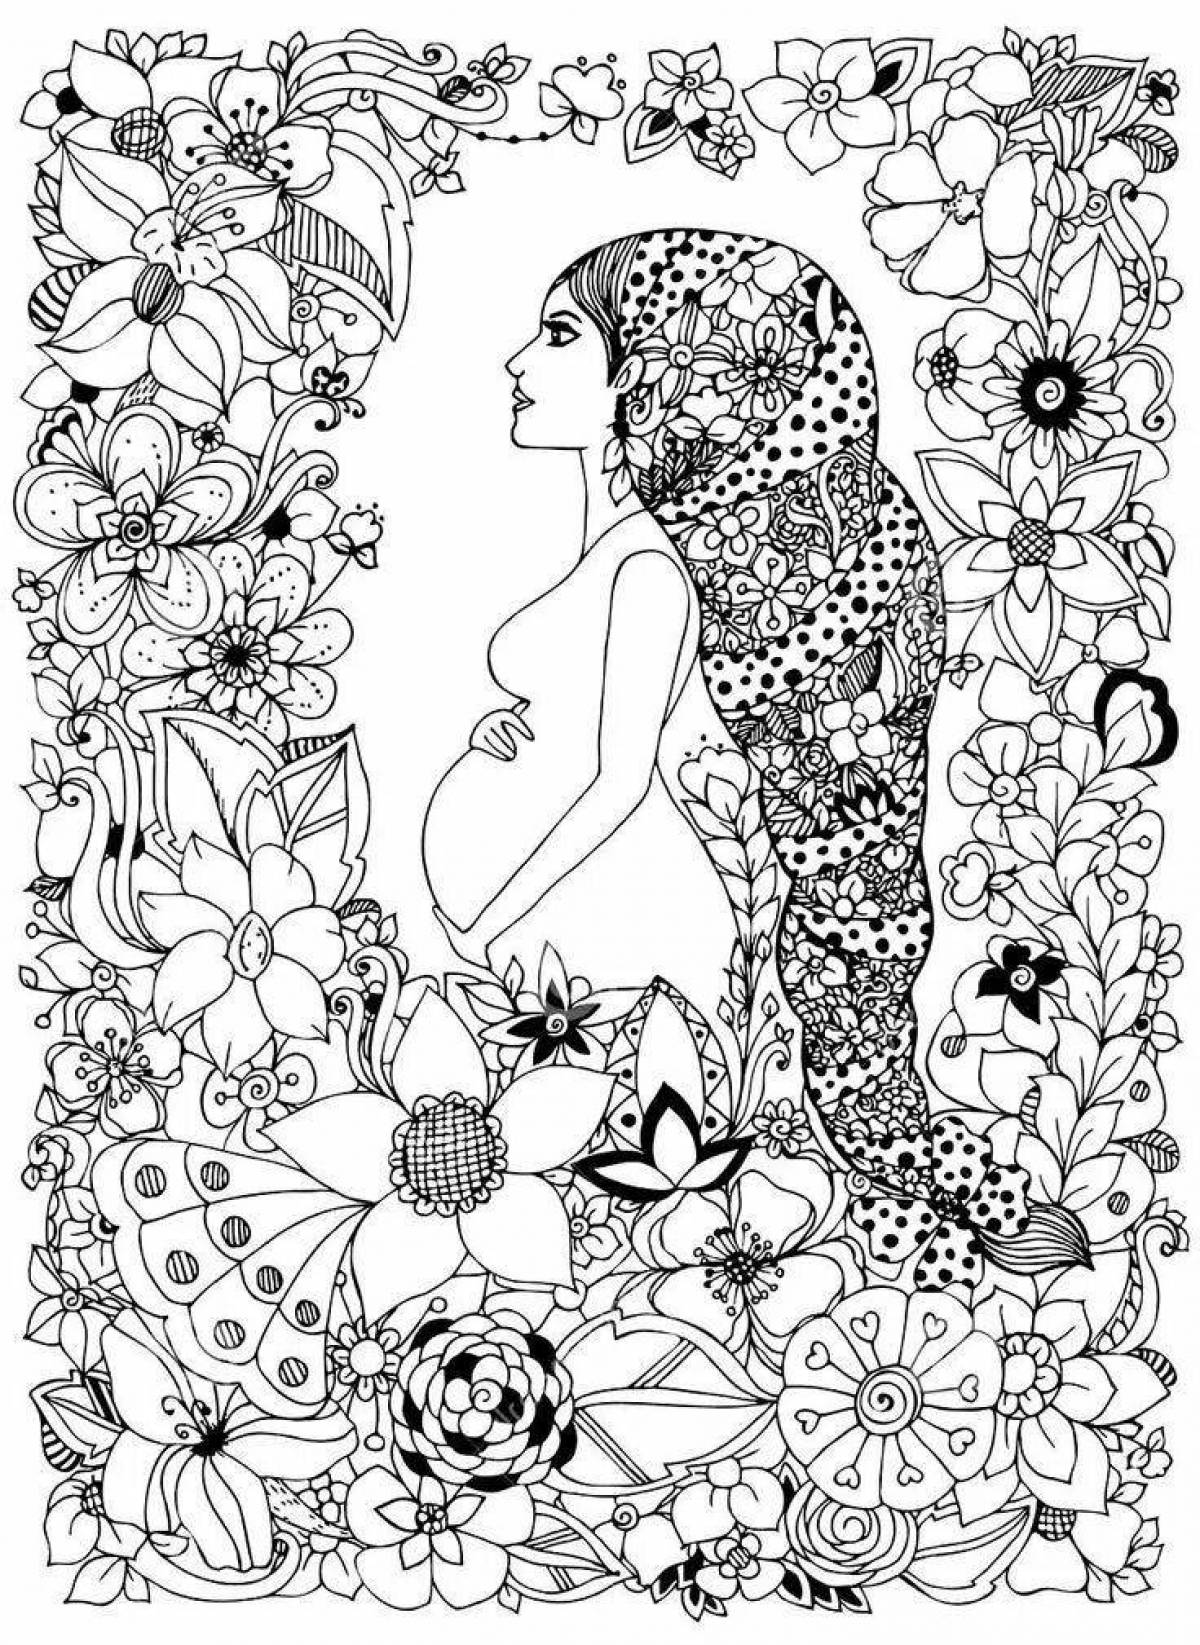 Soothing pregnancy coloring page